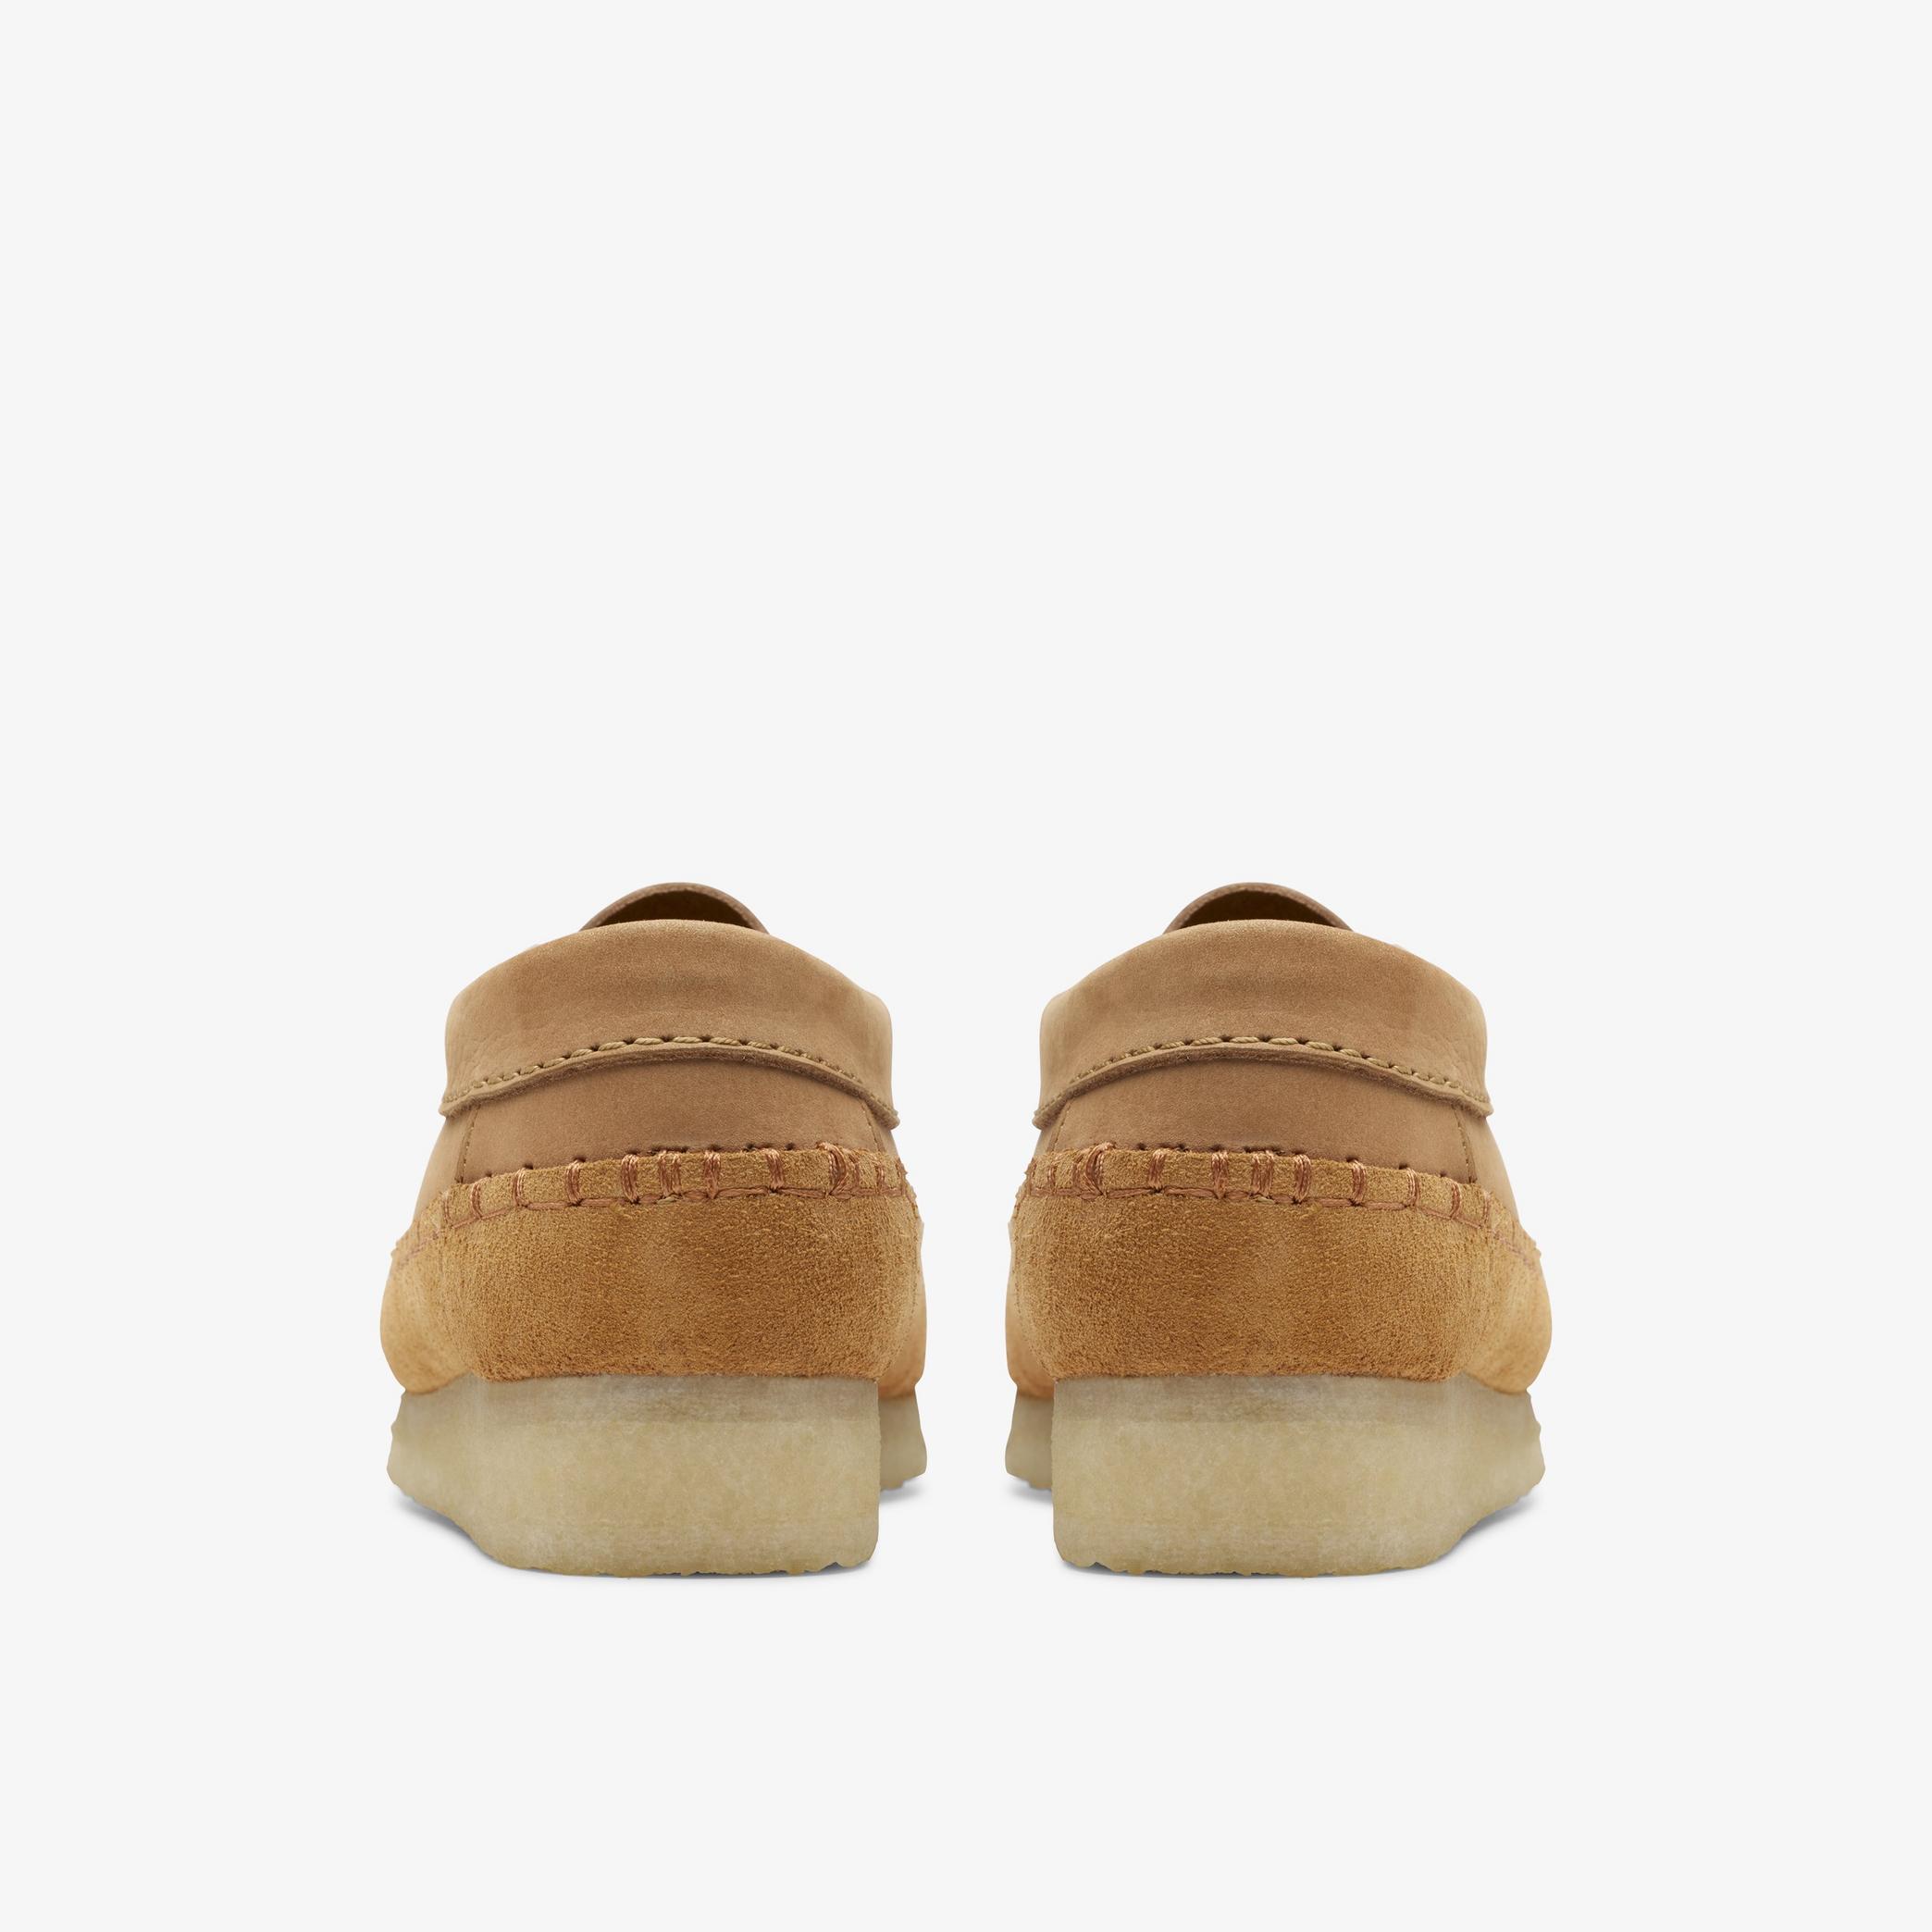 Weaver Tie Tan Suede Moccasins, view 5 of 6